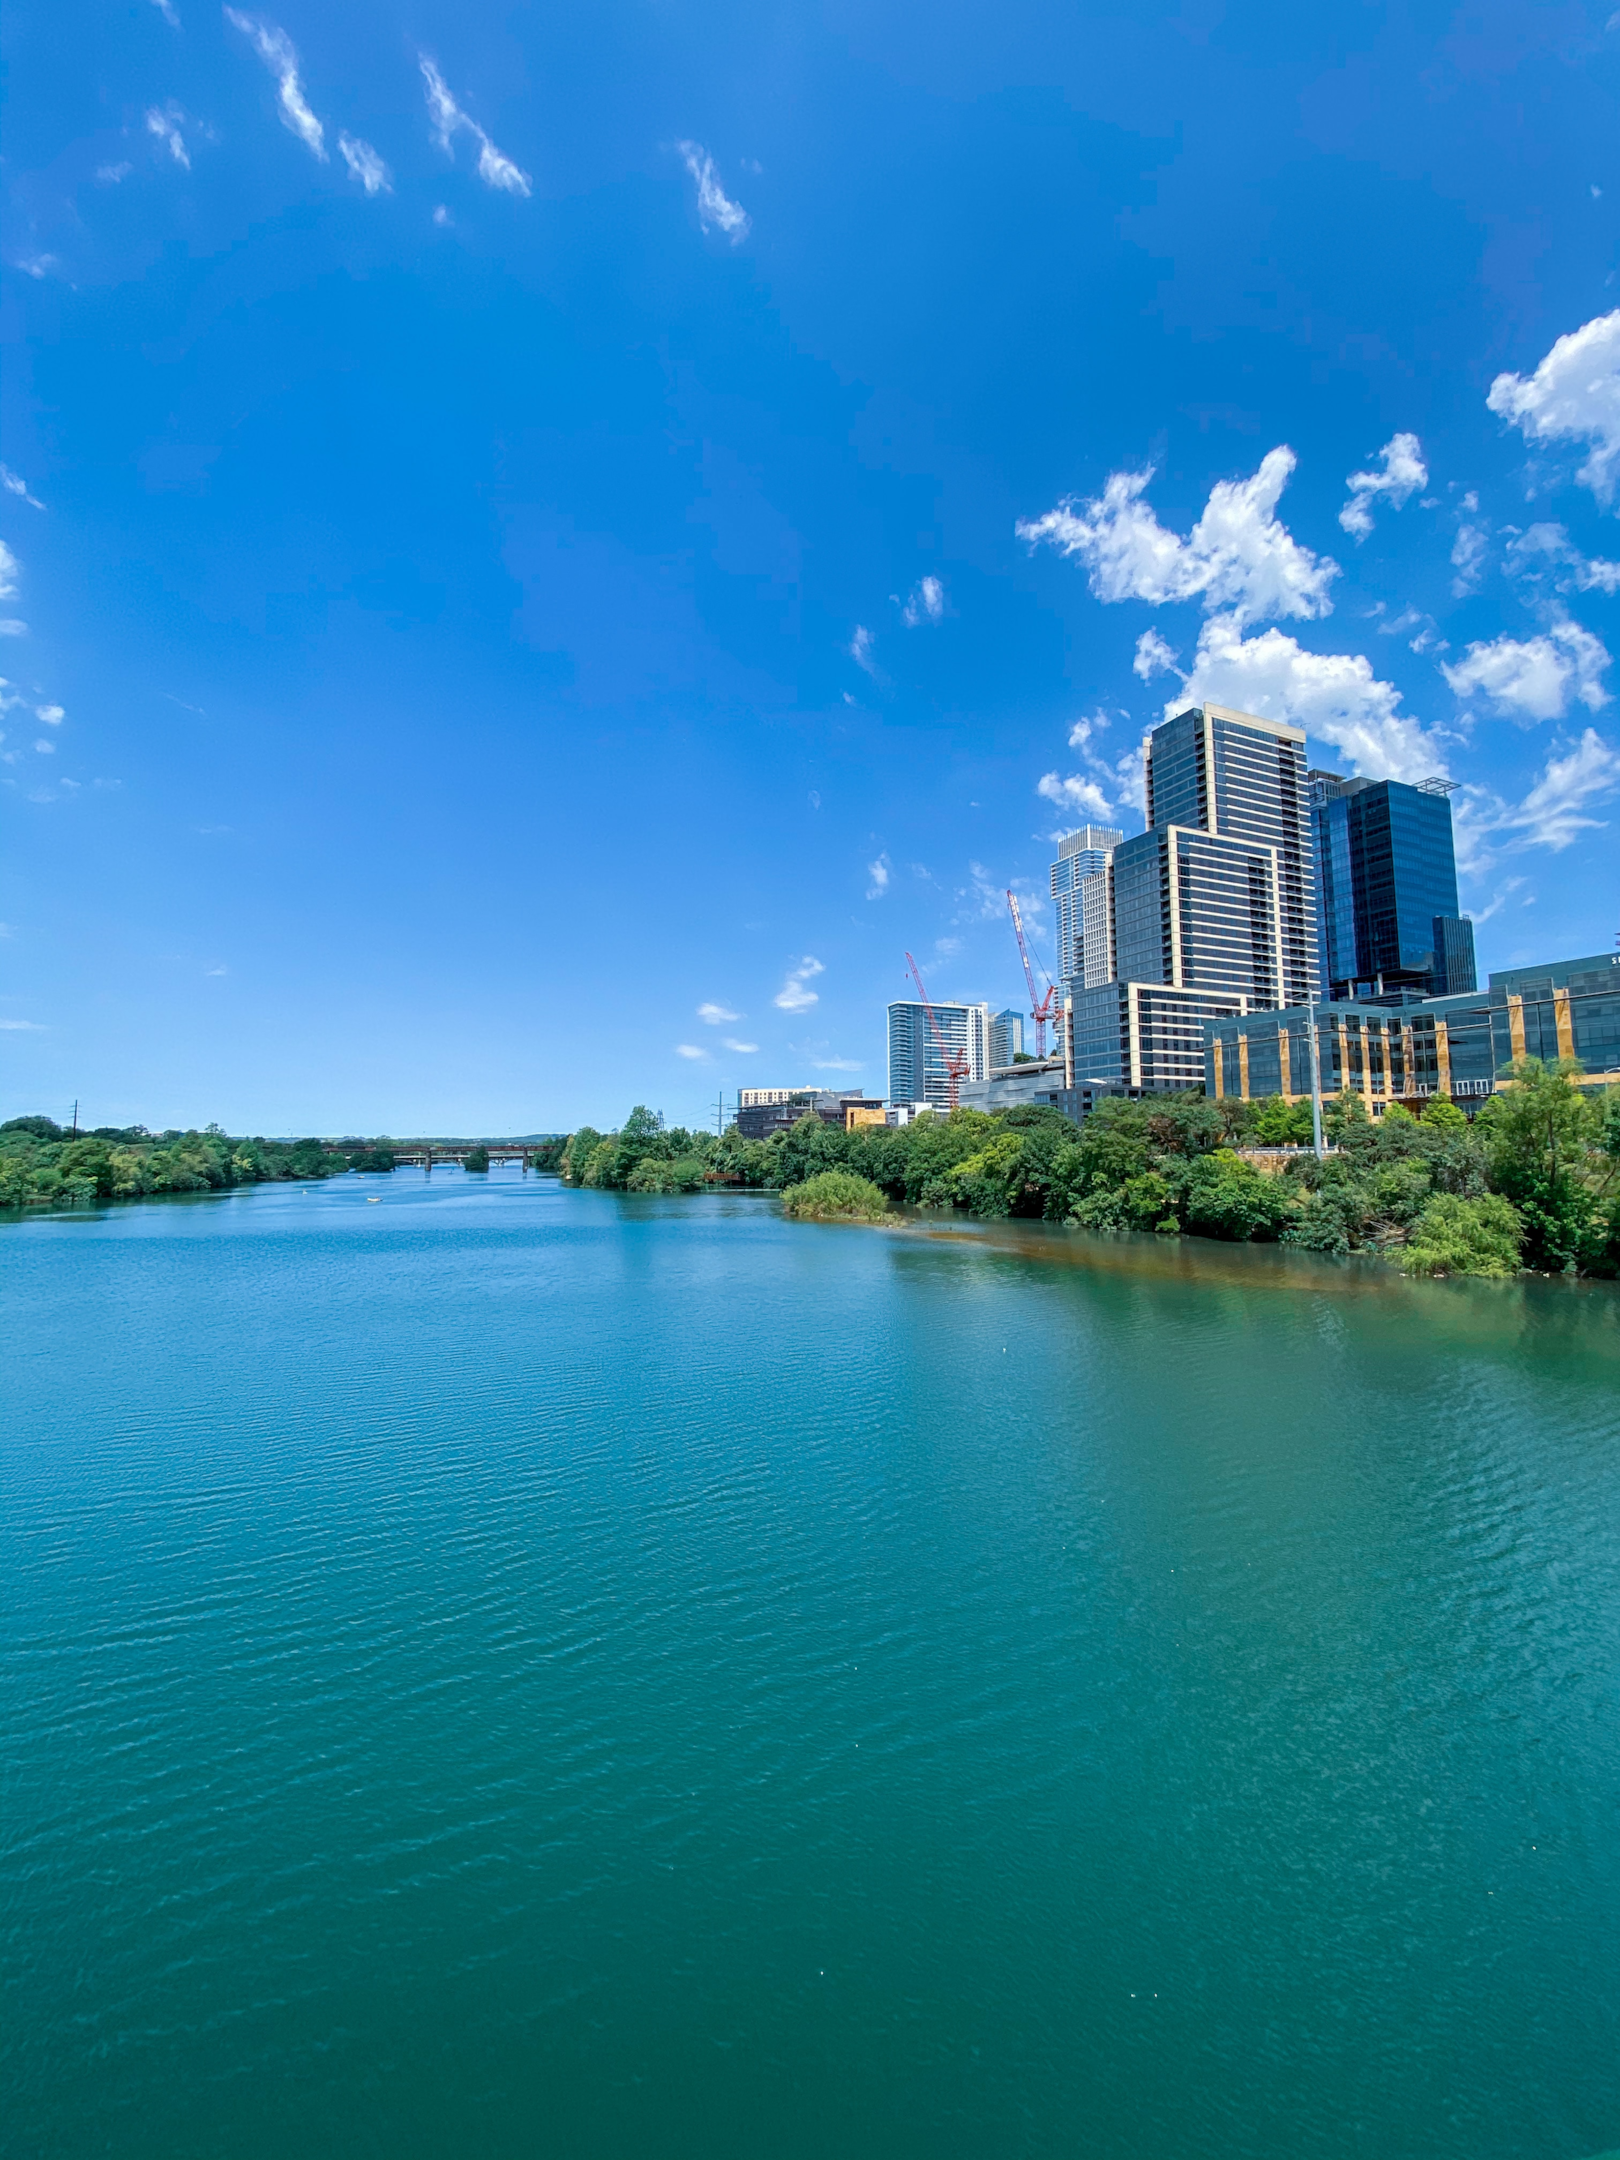 Austin, Tx is a great boating town. Contact Austin criminal defense attorney Rob Chesnutt if charged with BWI.